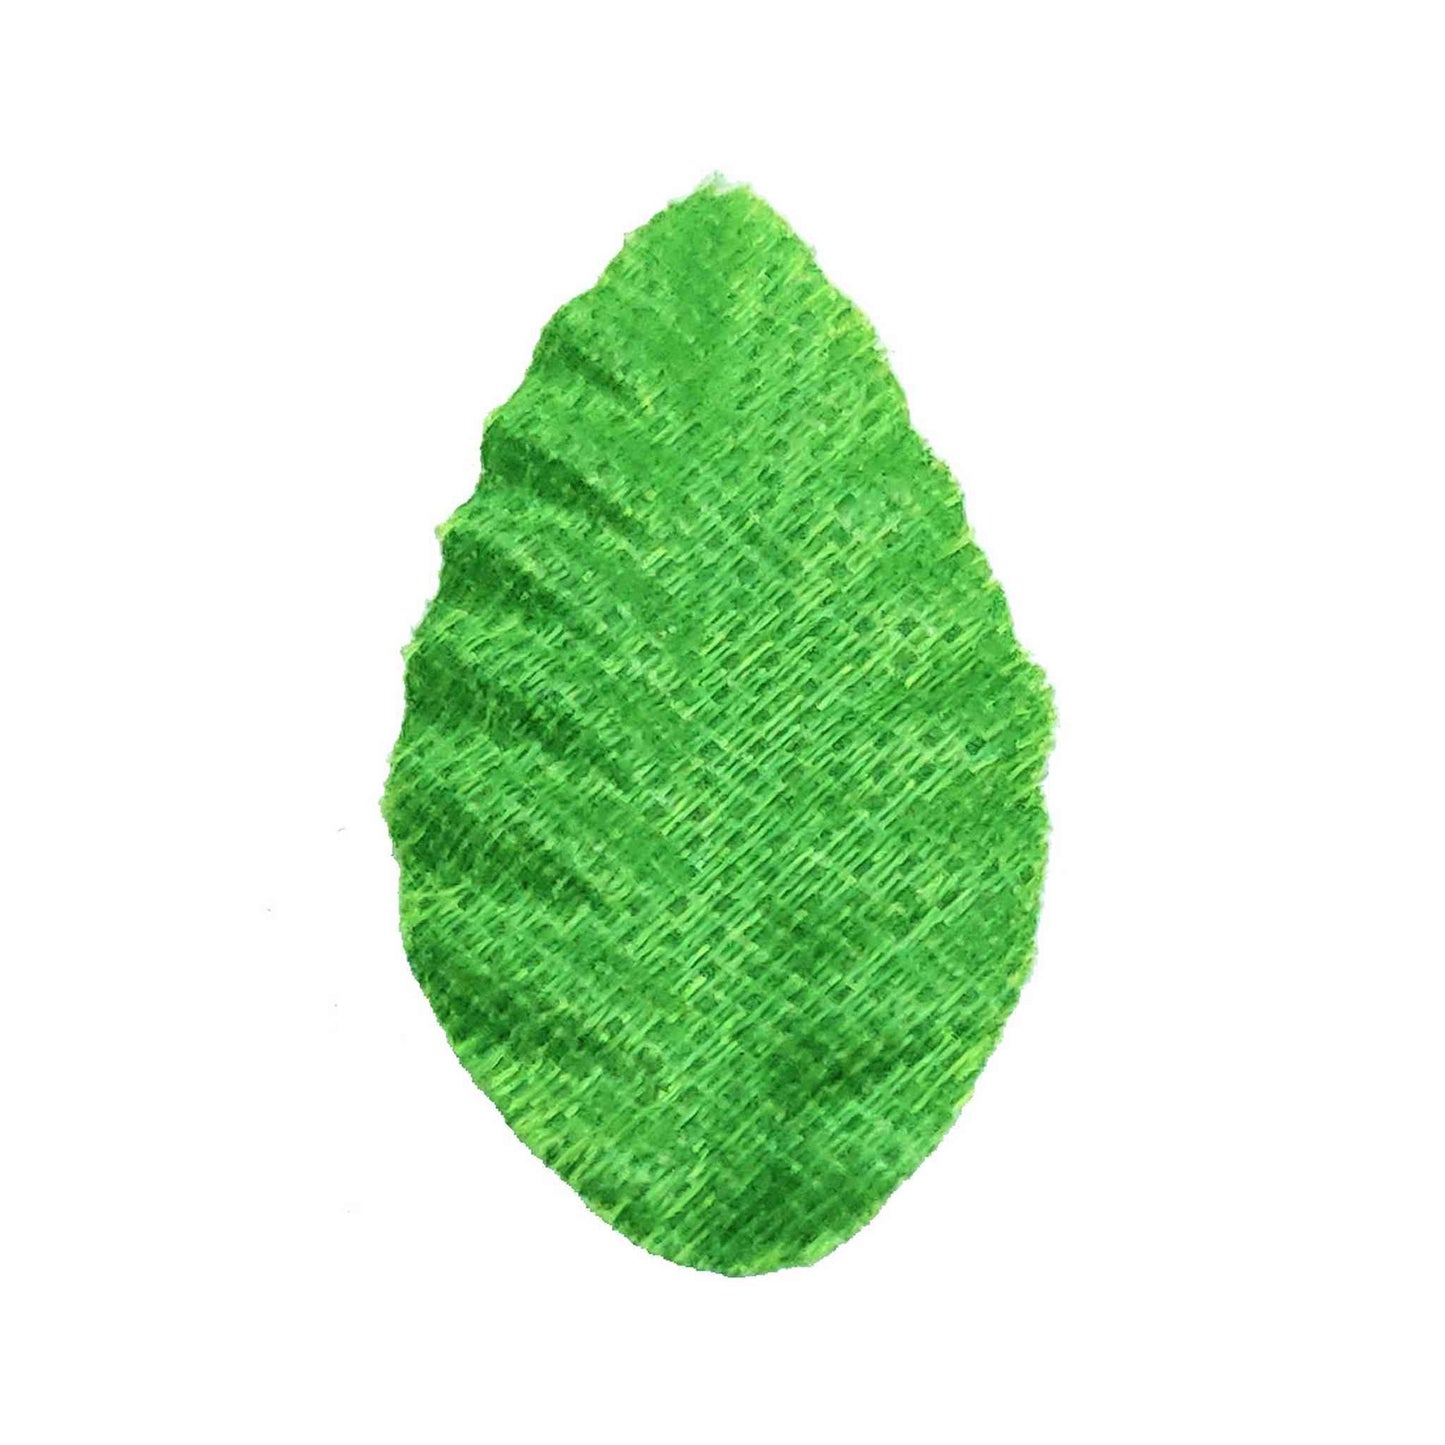 Indian Petals Mini Fabric Leaves for DIY Craft, Trouseau Packing or Decoration (Bunch of 12) - Design 61, Green - Indian Petals